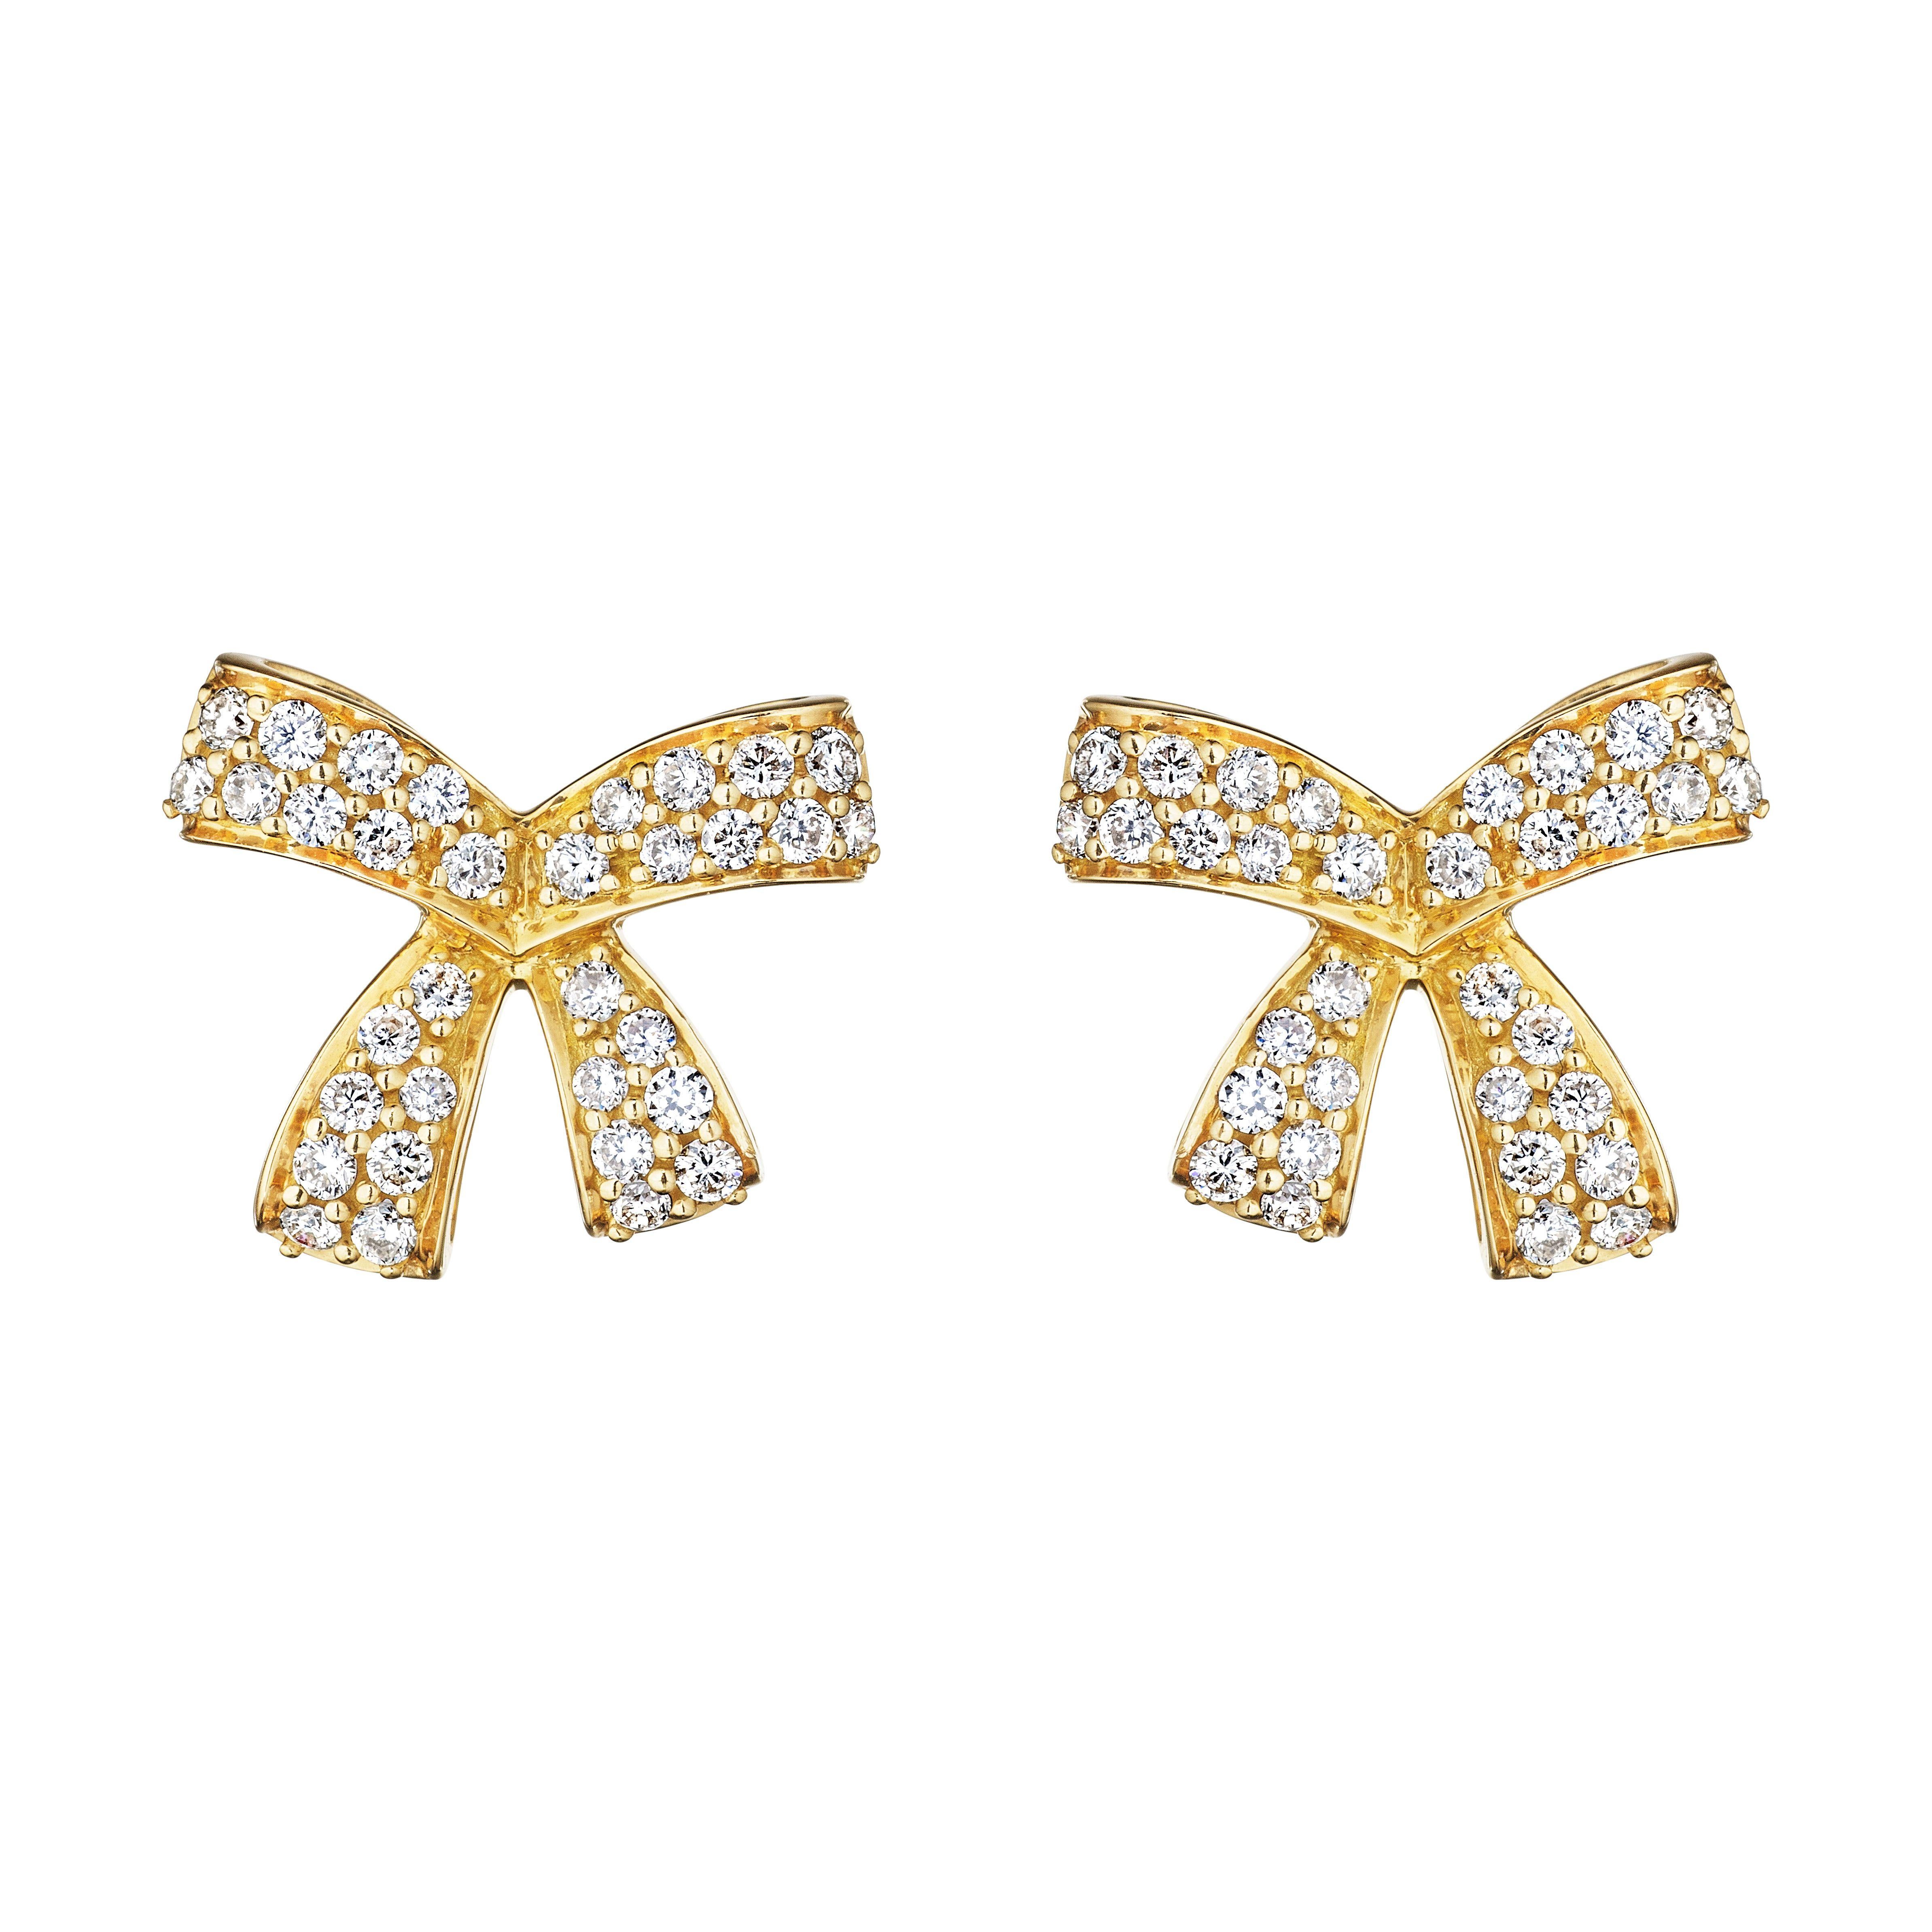 Flirtatious and enchanting, the Romance collection comprises an assortment of charming motifs like bows, embellished in pearl and diamonds. With an air of understated elegance, the jewelry here allows you to express yourself in the most effortless